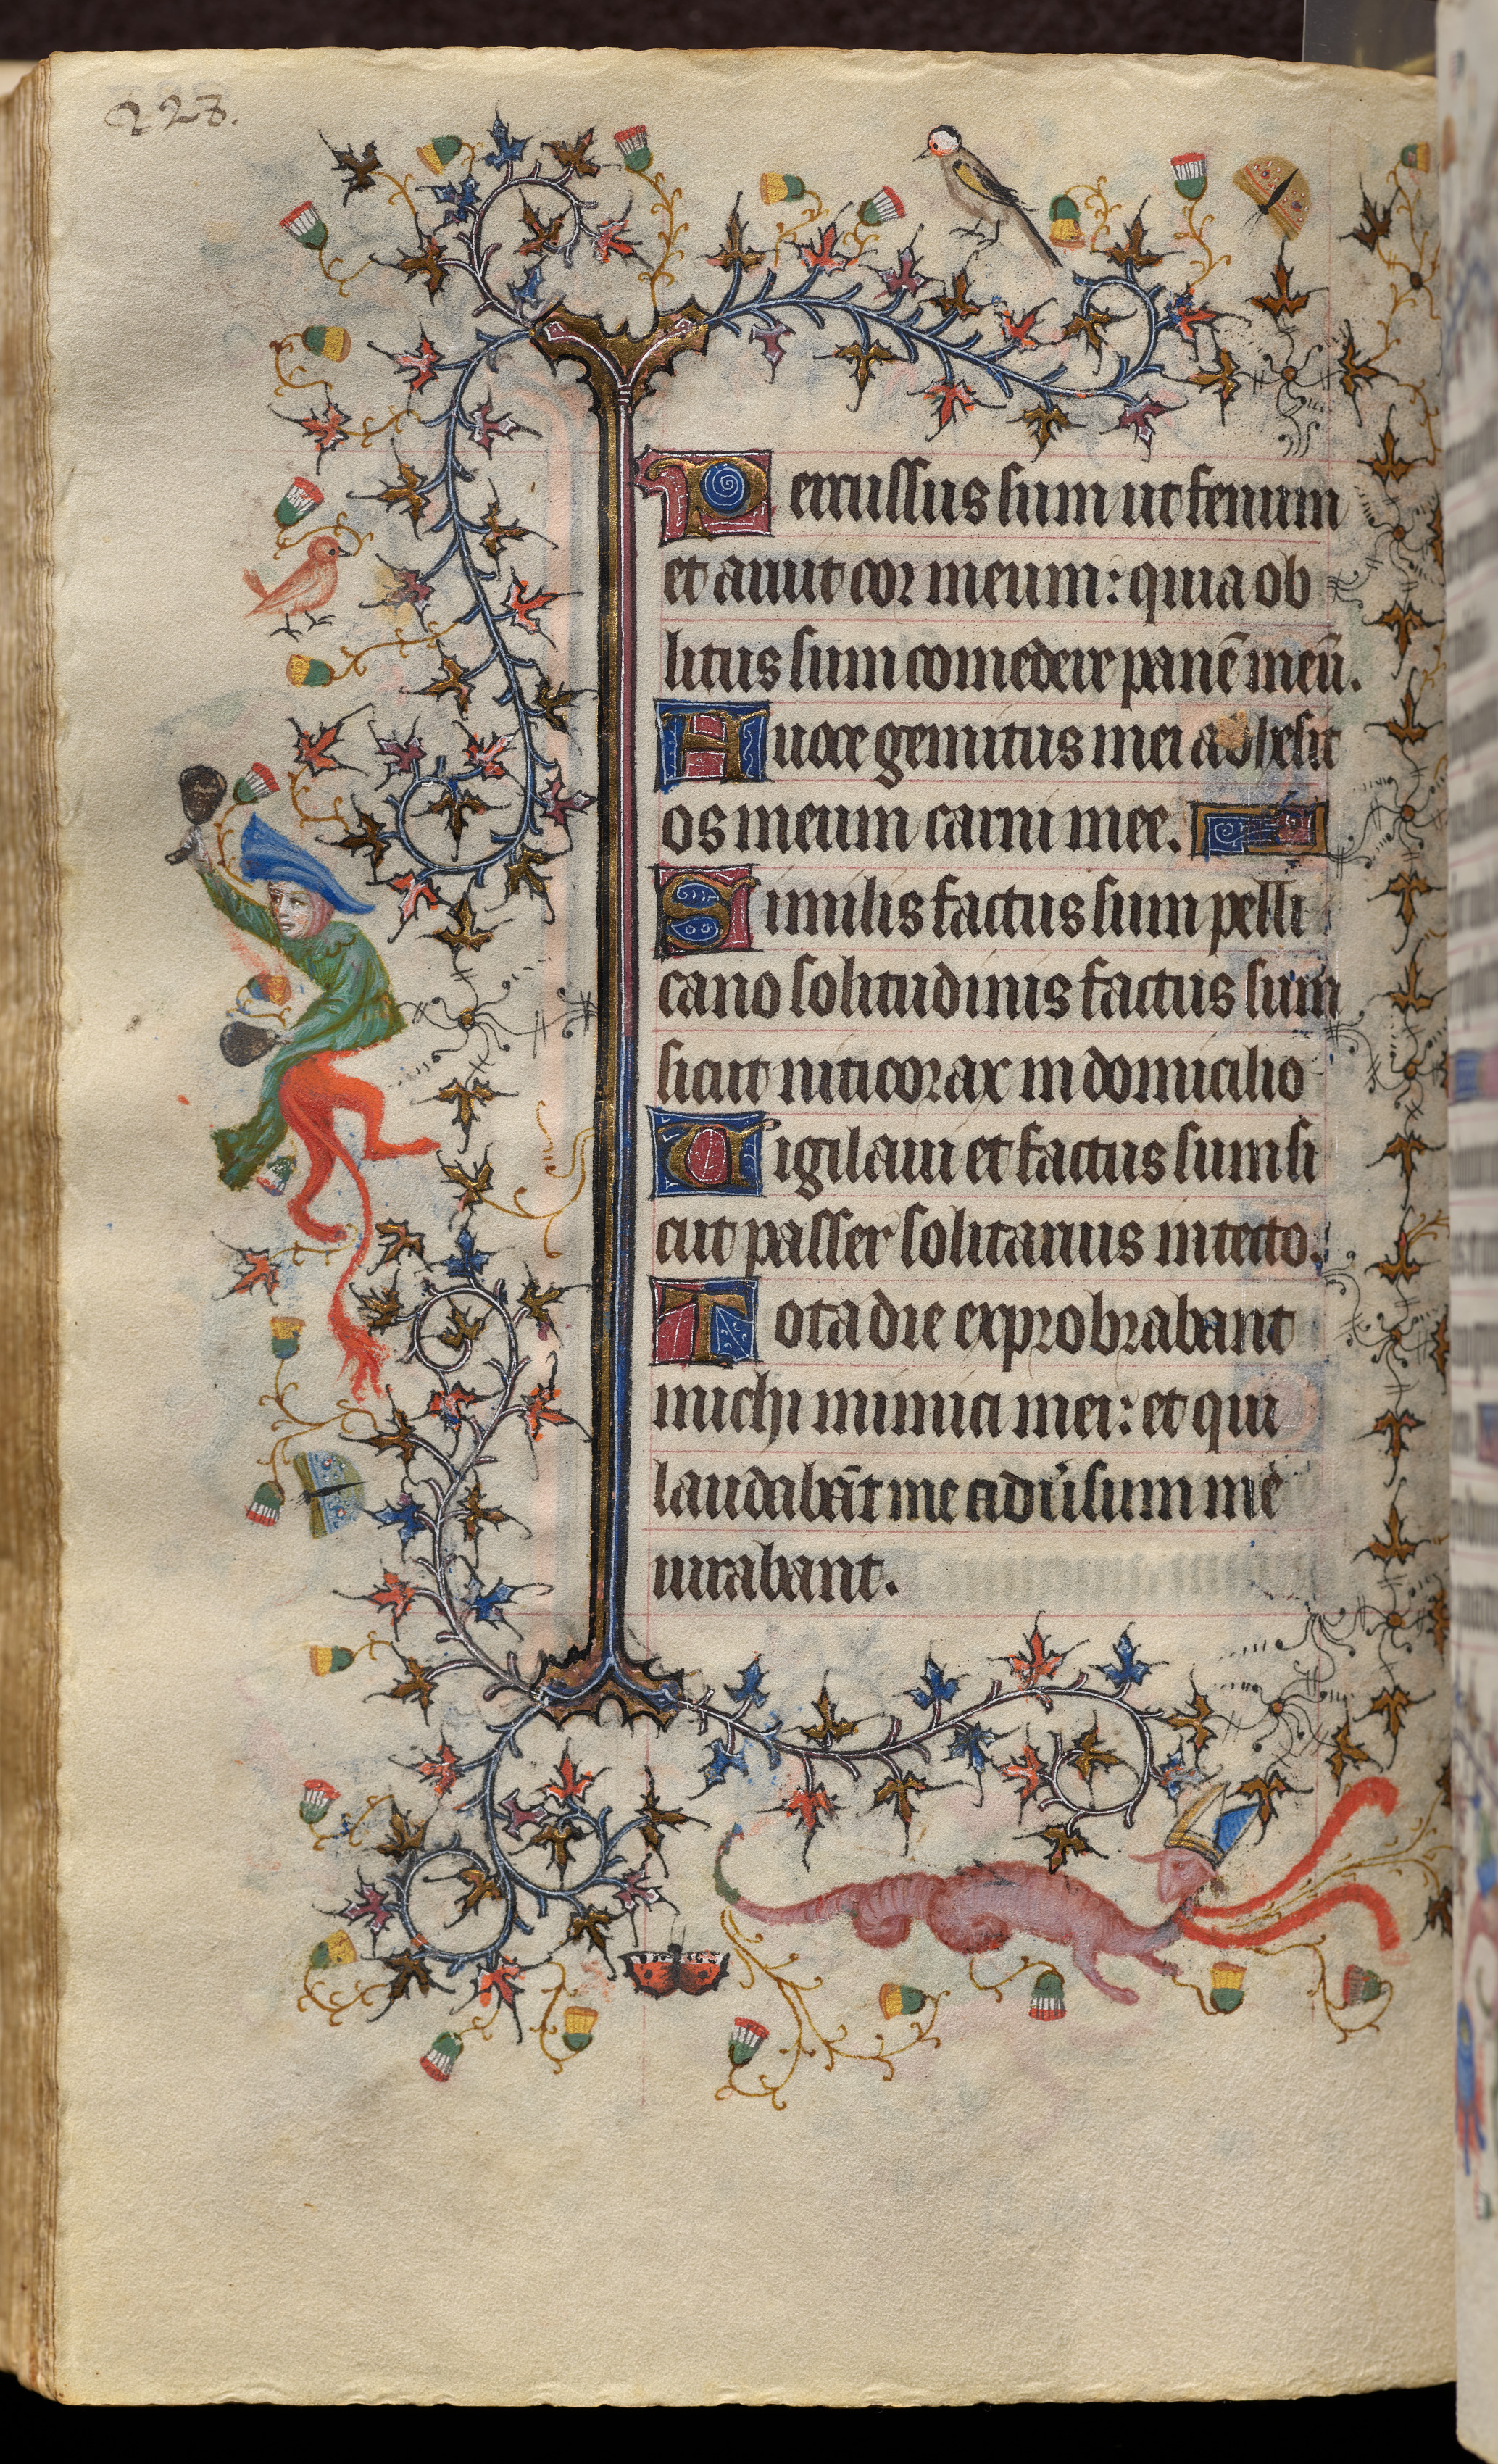 Hours of Charles the Noble, King of Navarre (1361-1425): fol. 114v, Text